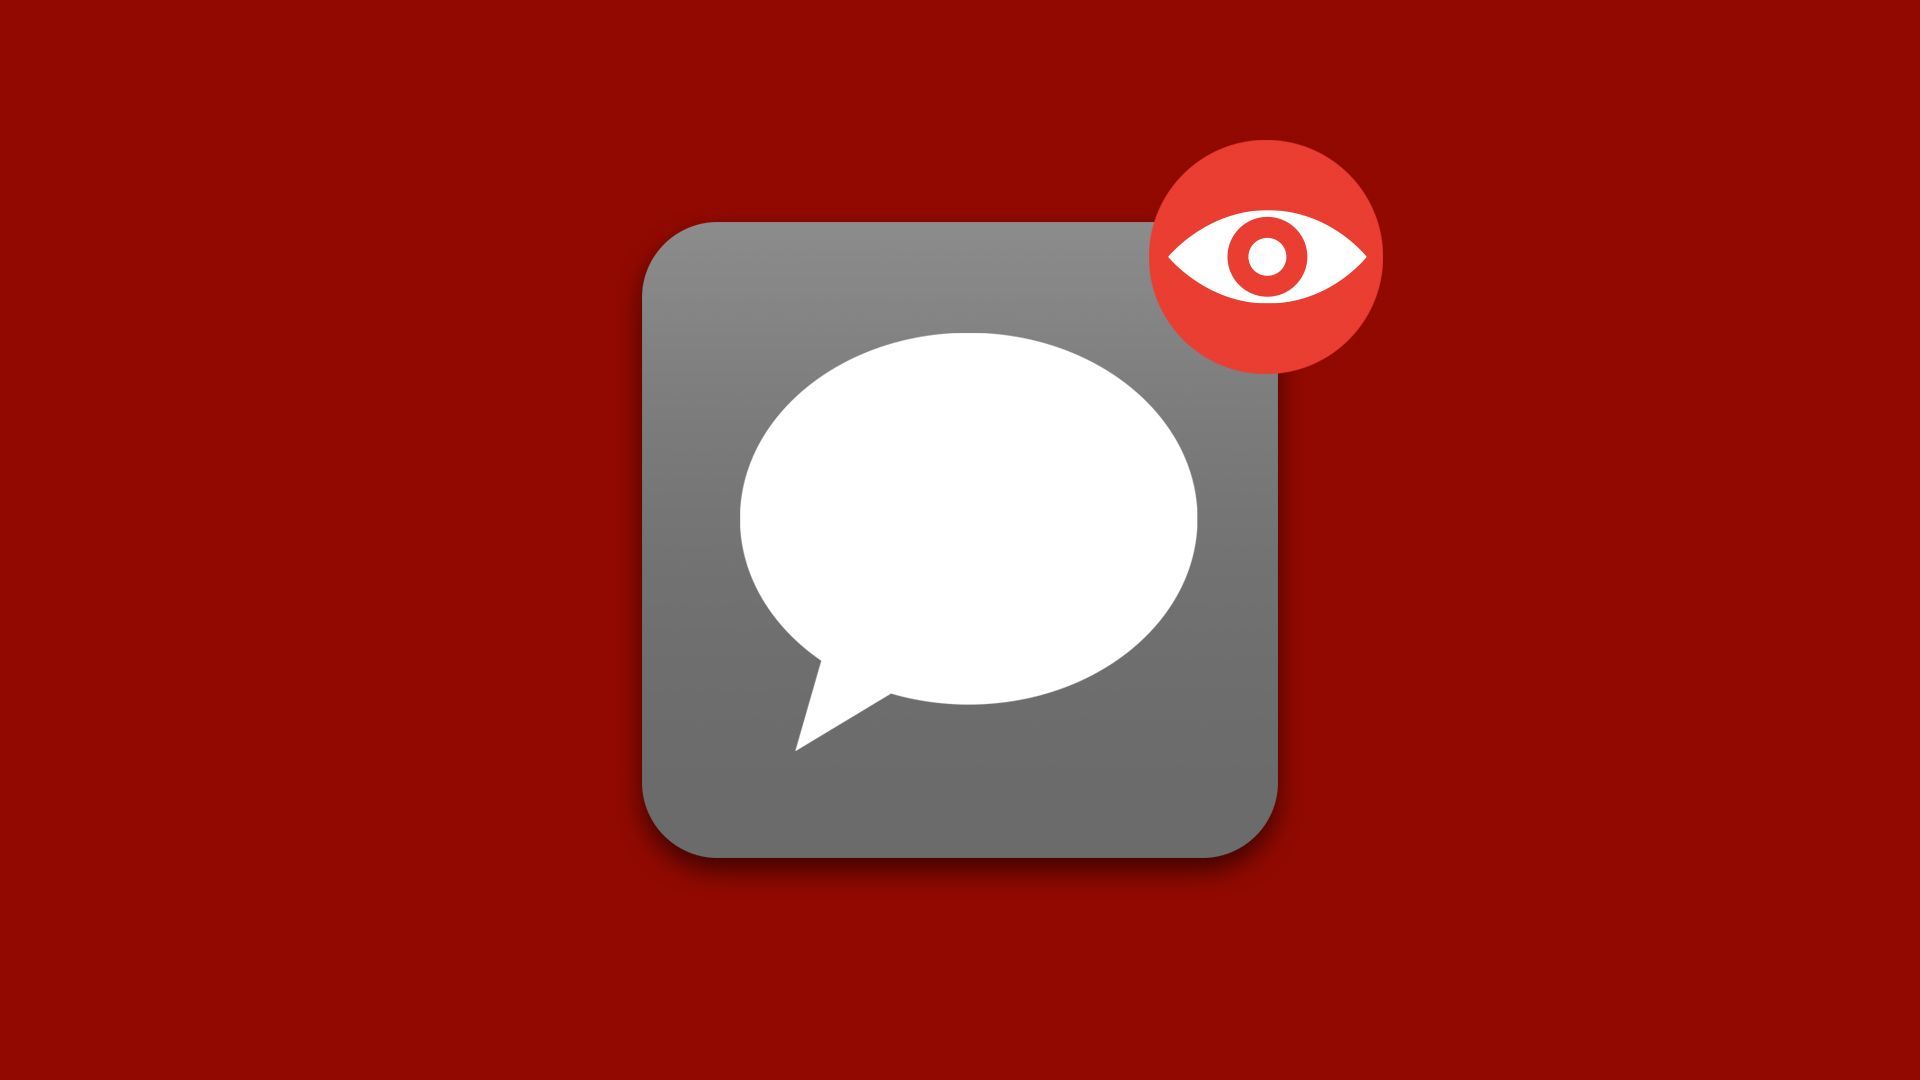 Illustration of a message app with a notification of an eye